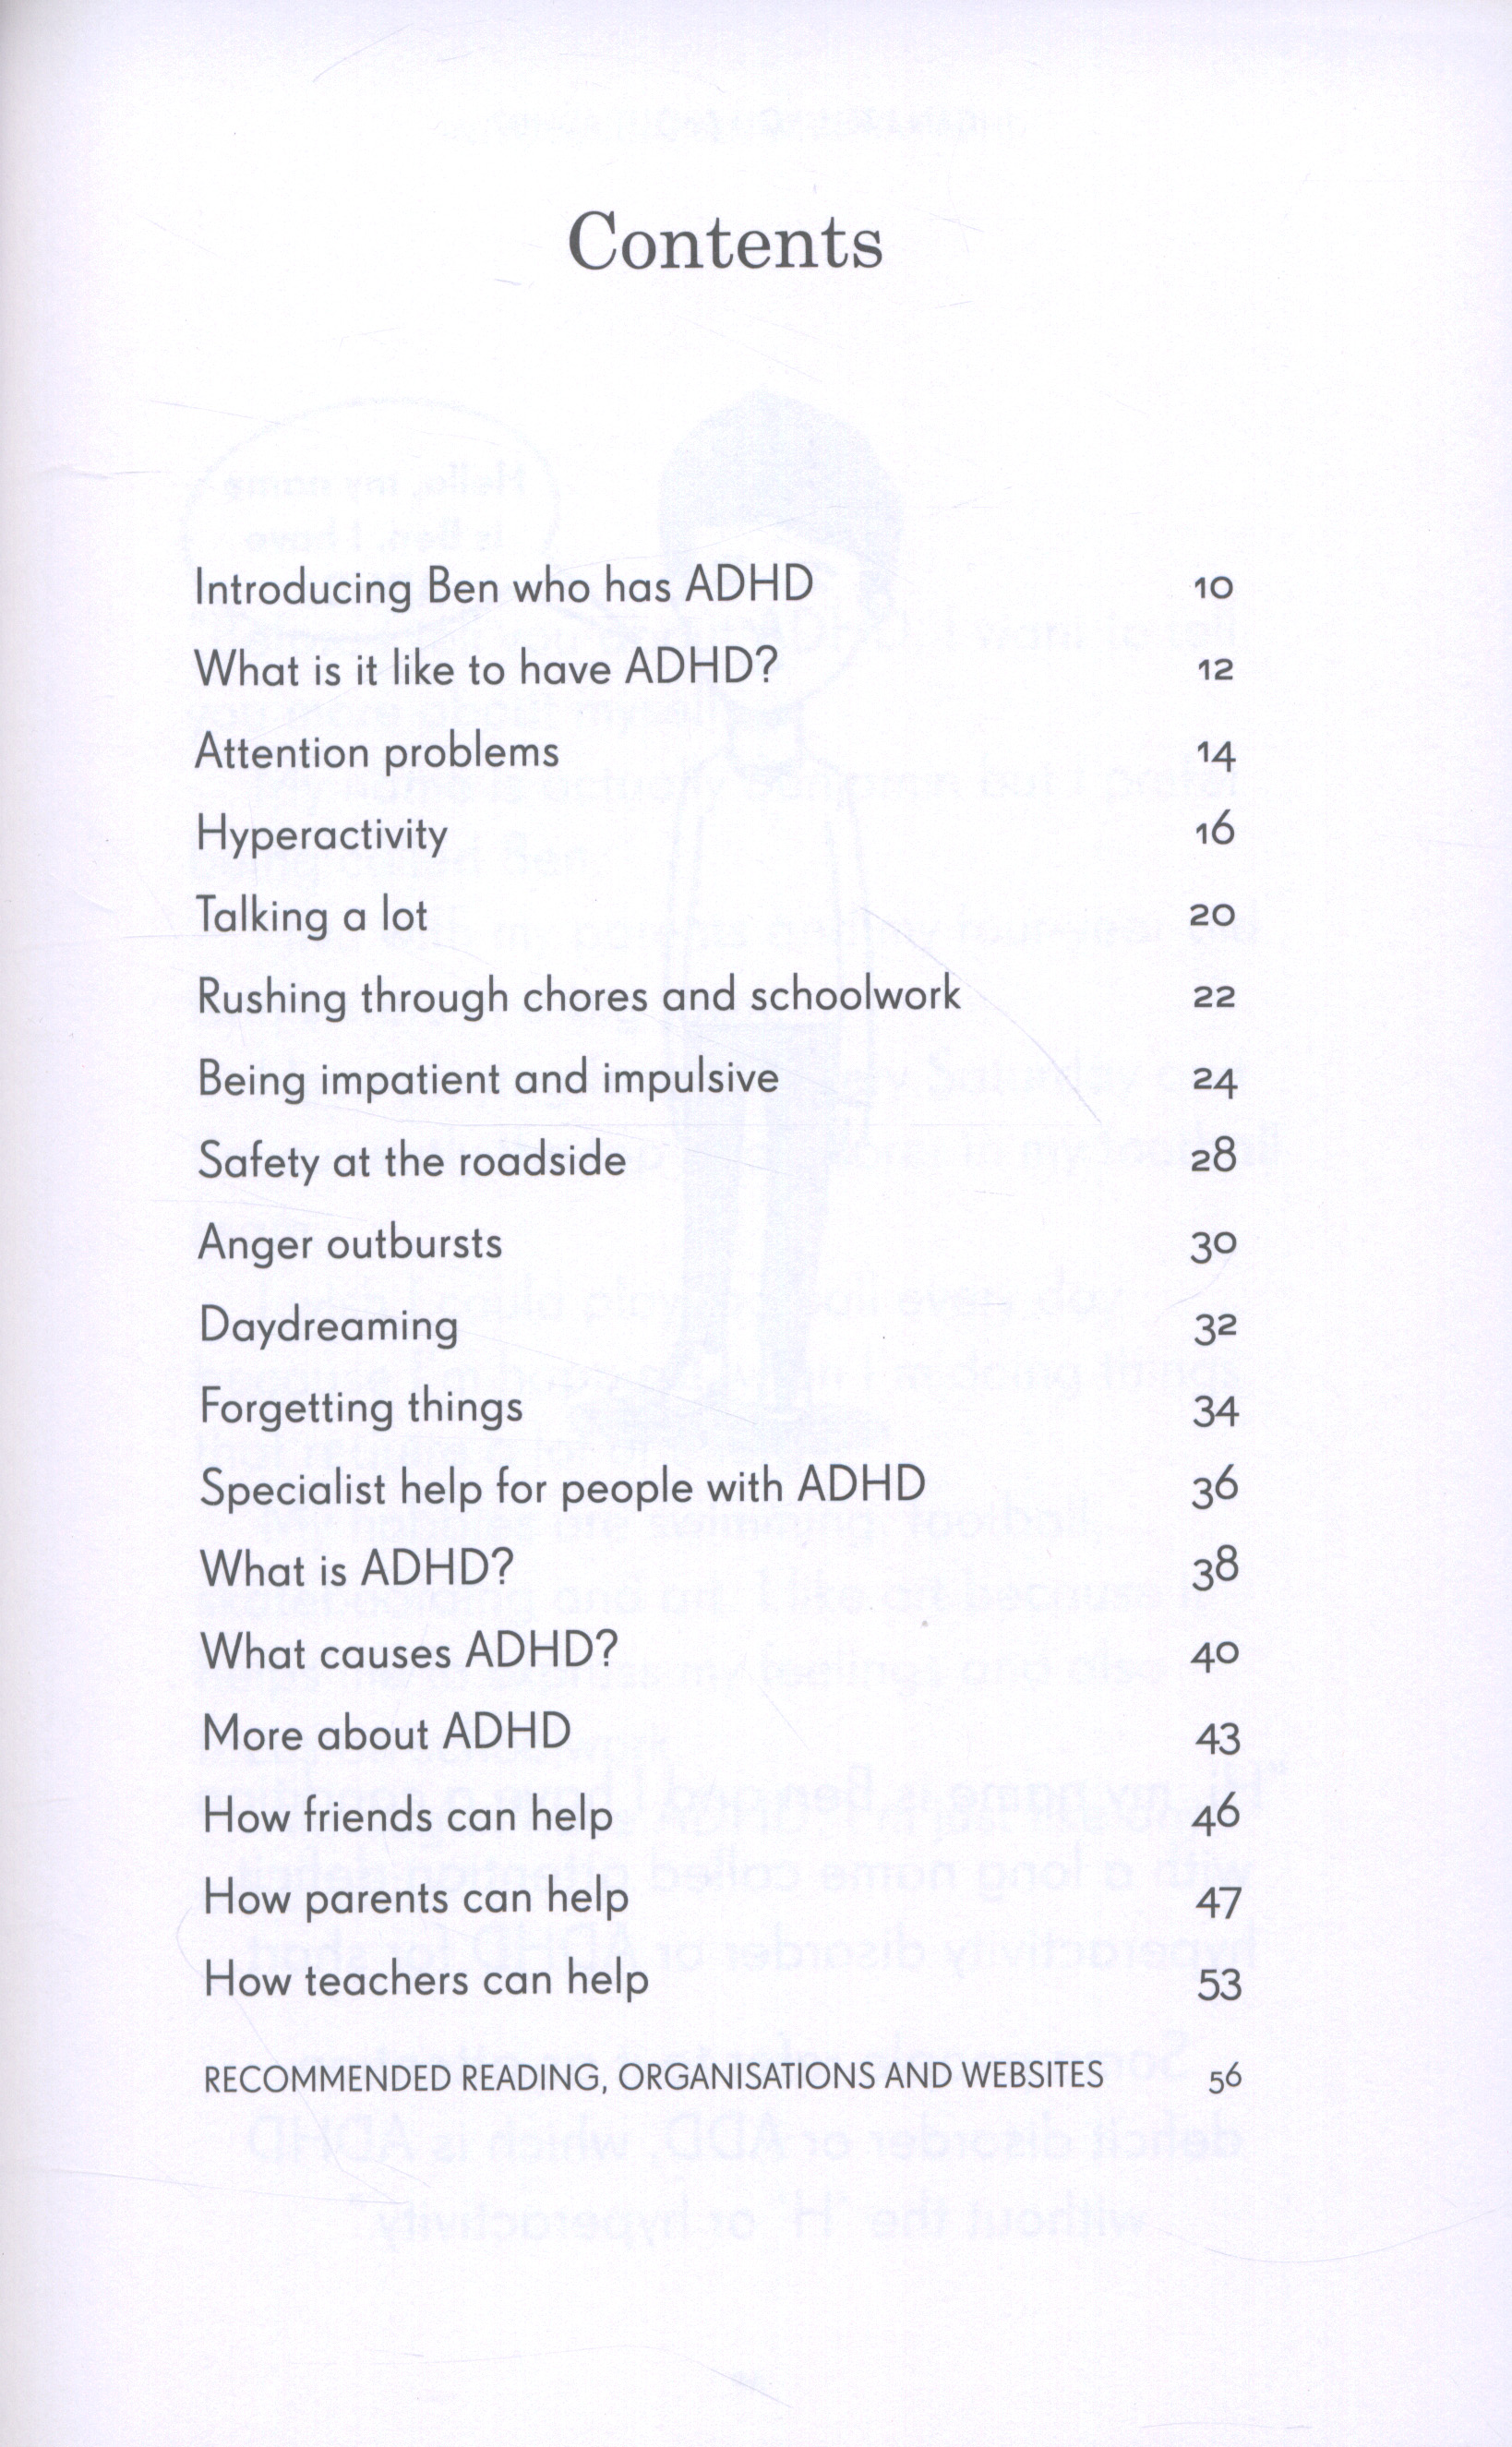 family and professionals A guide for friends Can I tell you about ADHD?